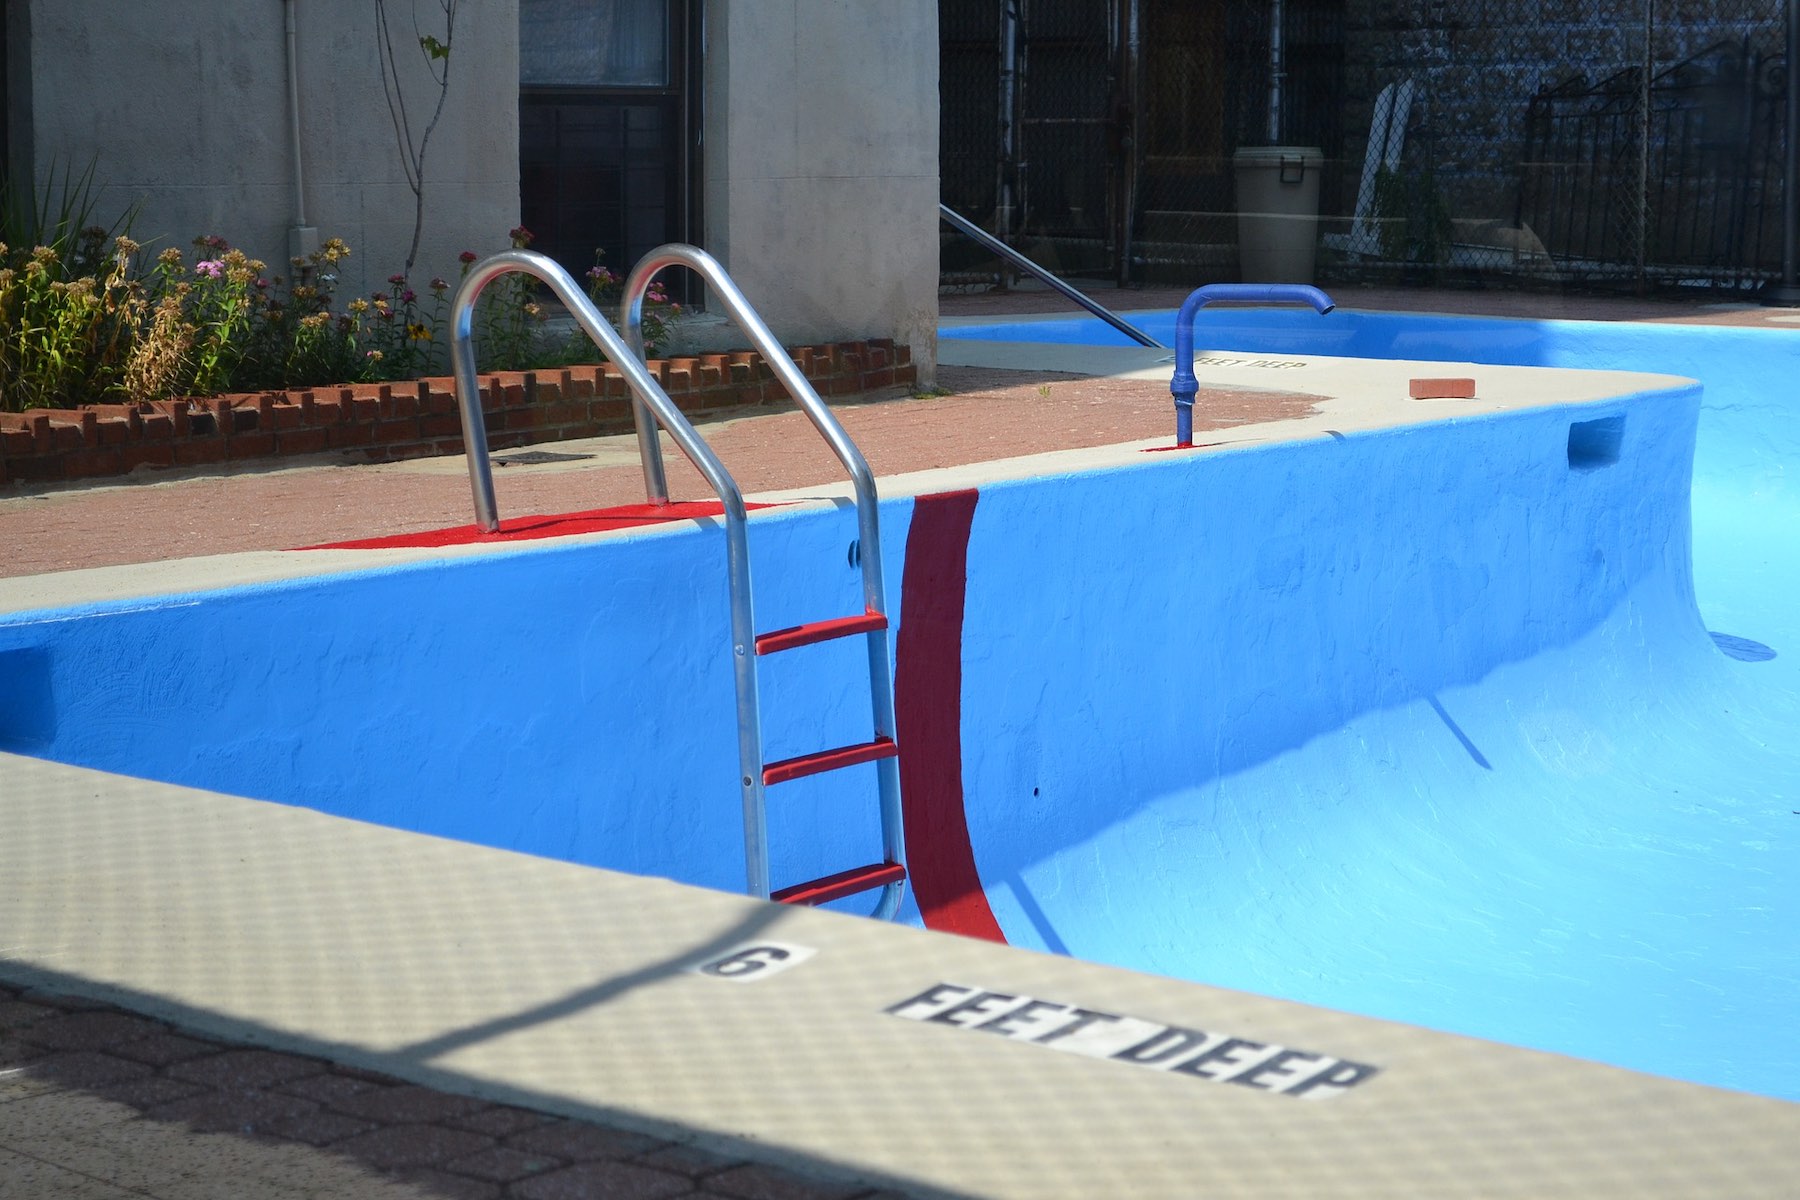 Above Ground Pool Steps: Saving money with above ground pool steps